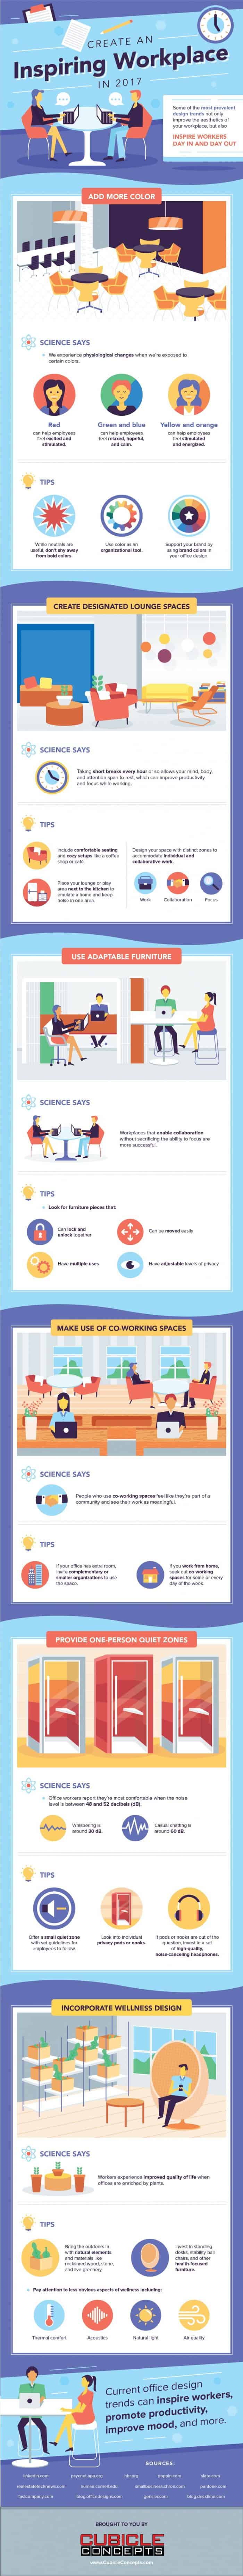 infographic with tips for getting inspired in your workplace